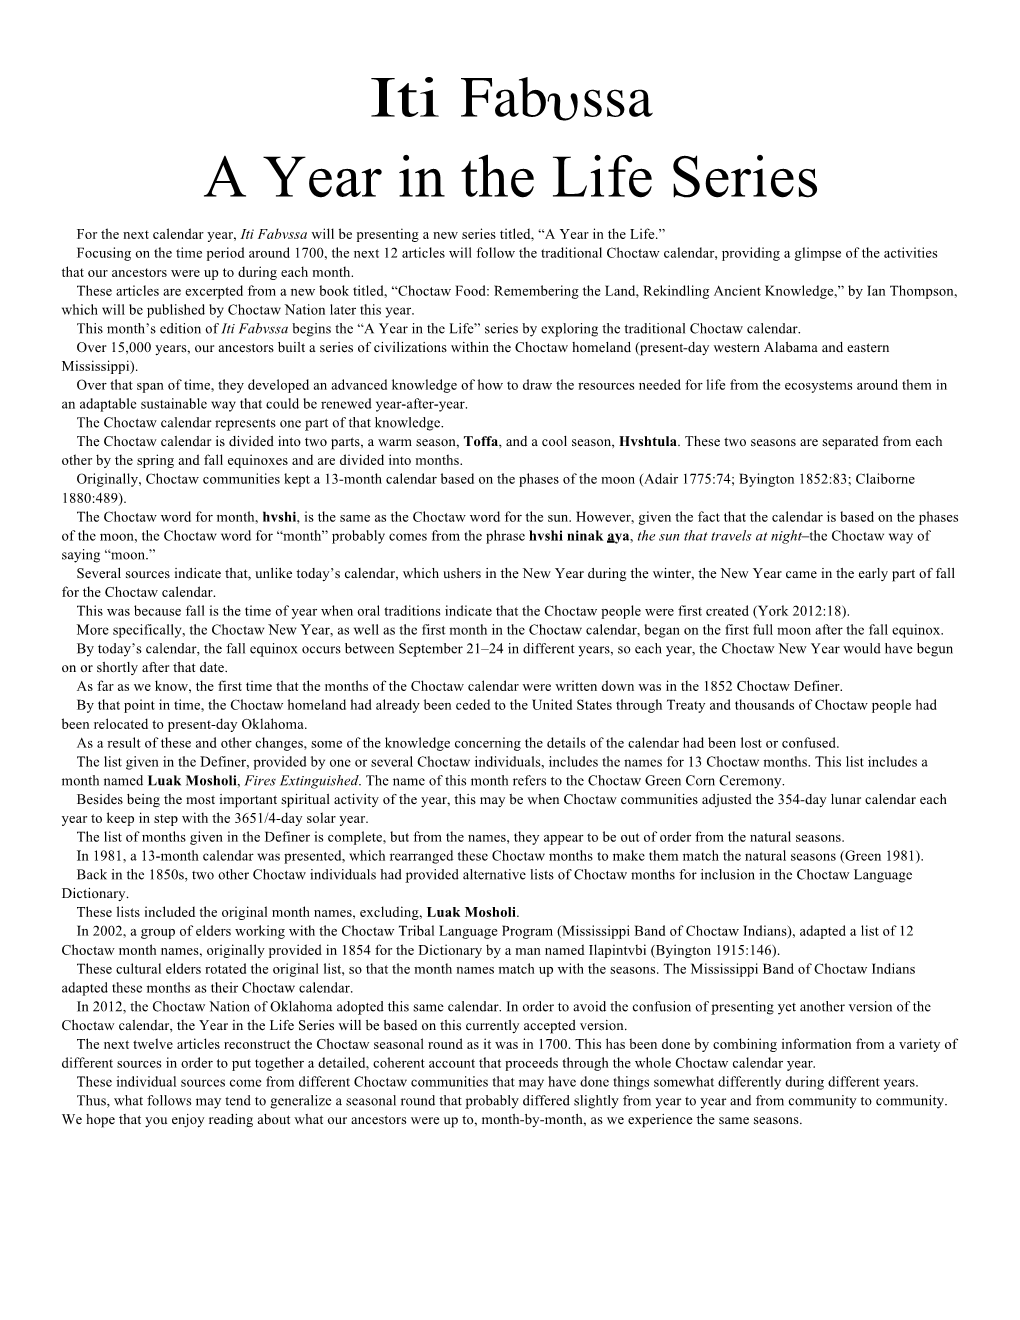 A Year in the Life Series